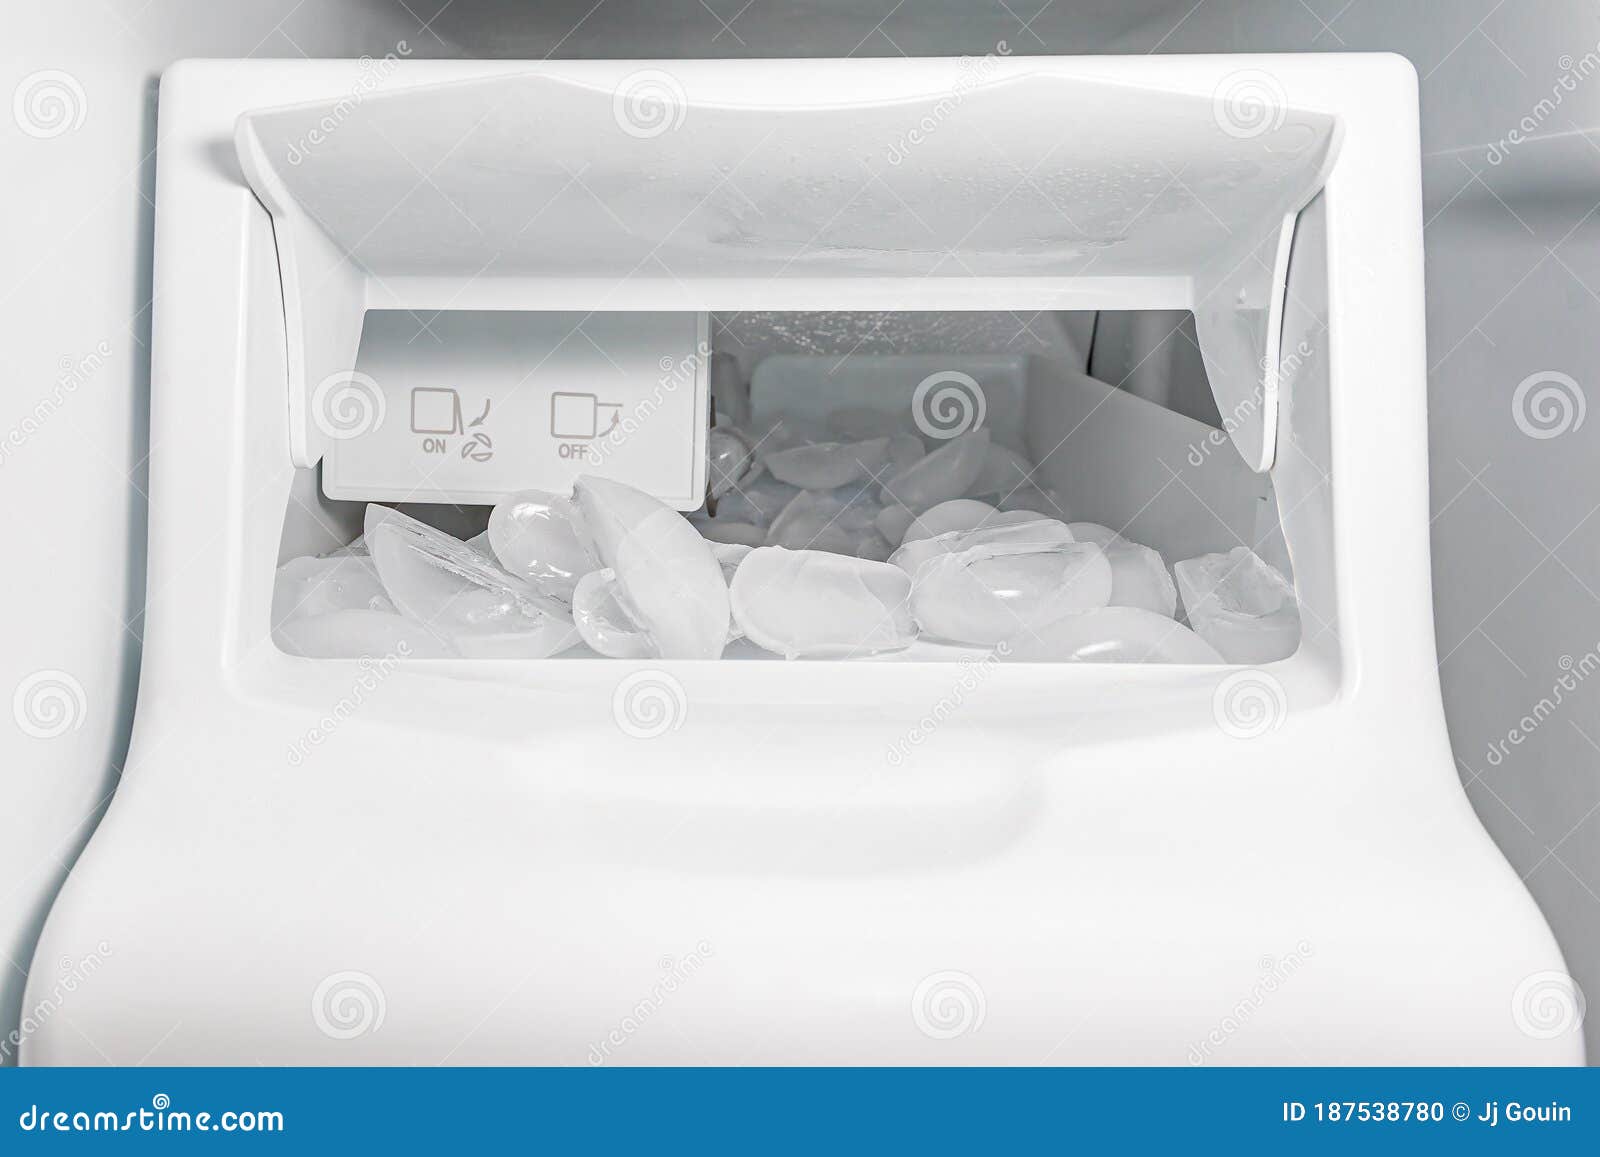 closeup of ice maker, ice machine in refrigerator with ice cubes